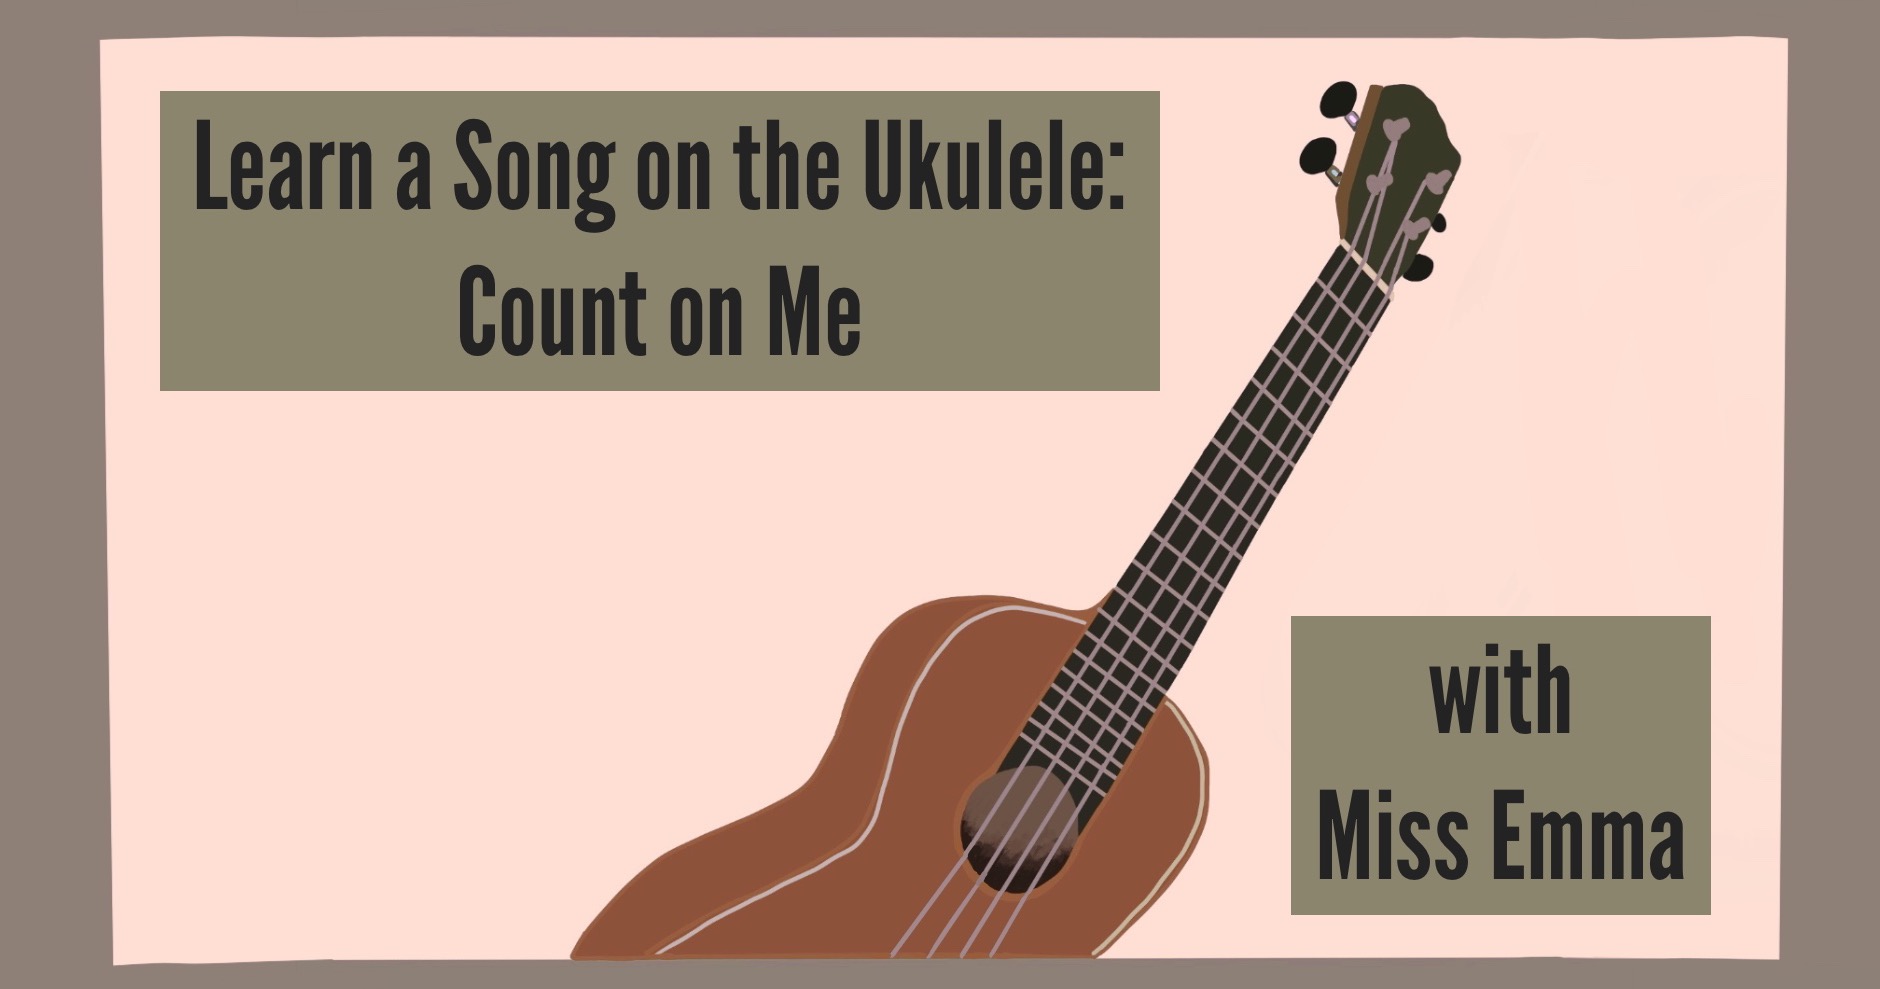 Learn a the Ukulele: Count on Me | Small Online for Ages 9-14